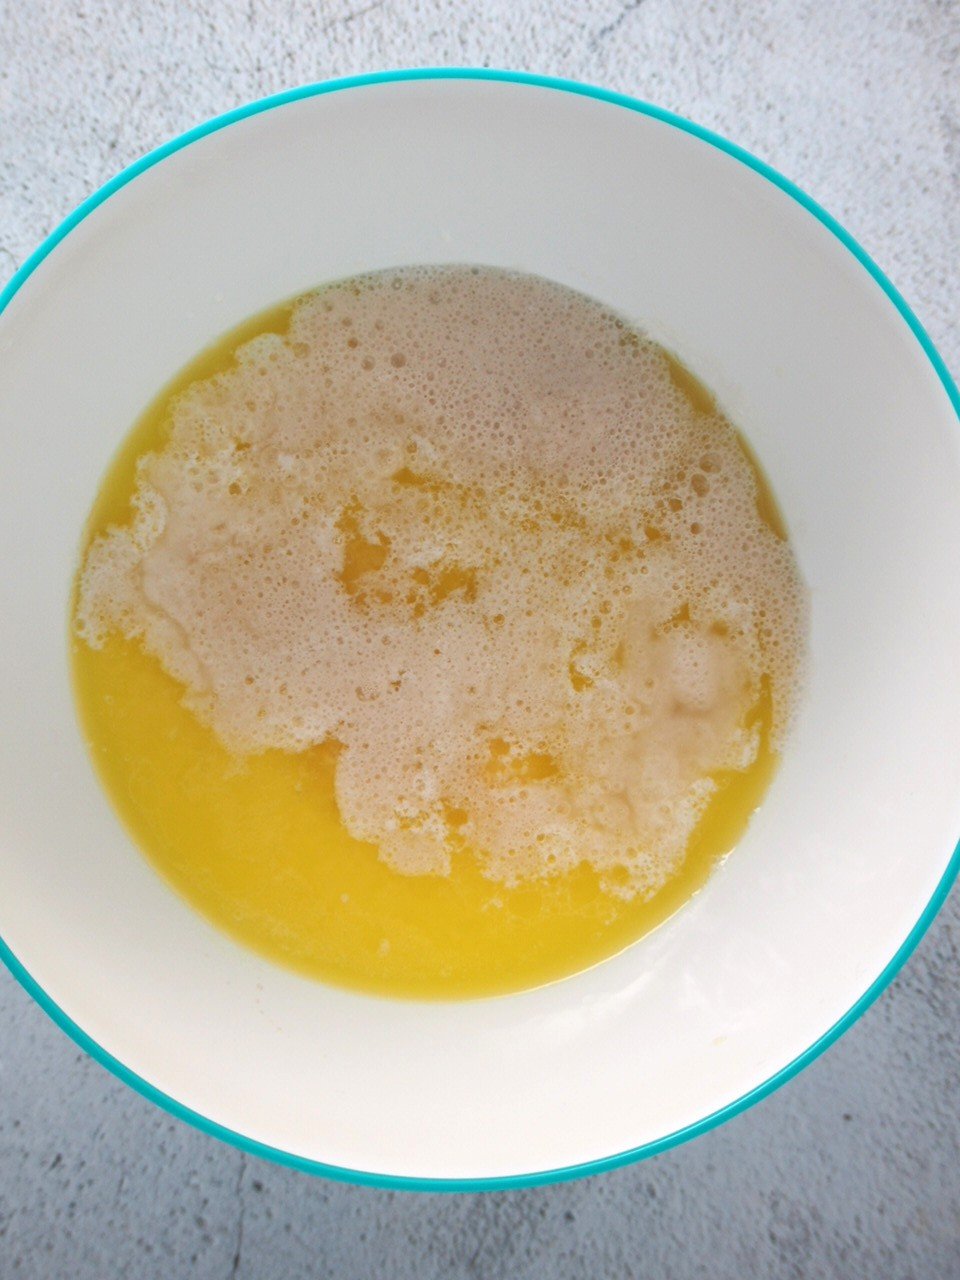 The egg, milk, butter, sugar and salt is added to the yeast mixture.